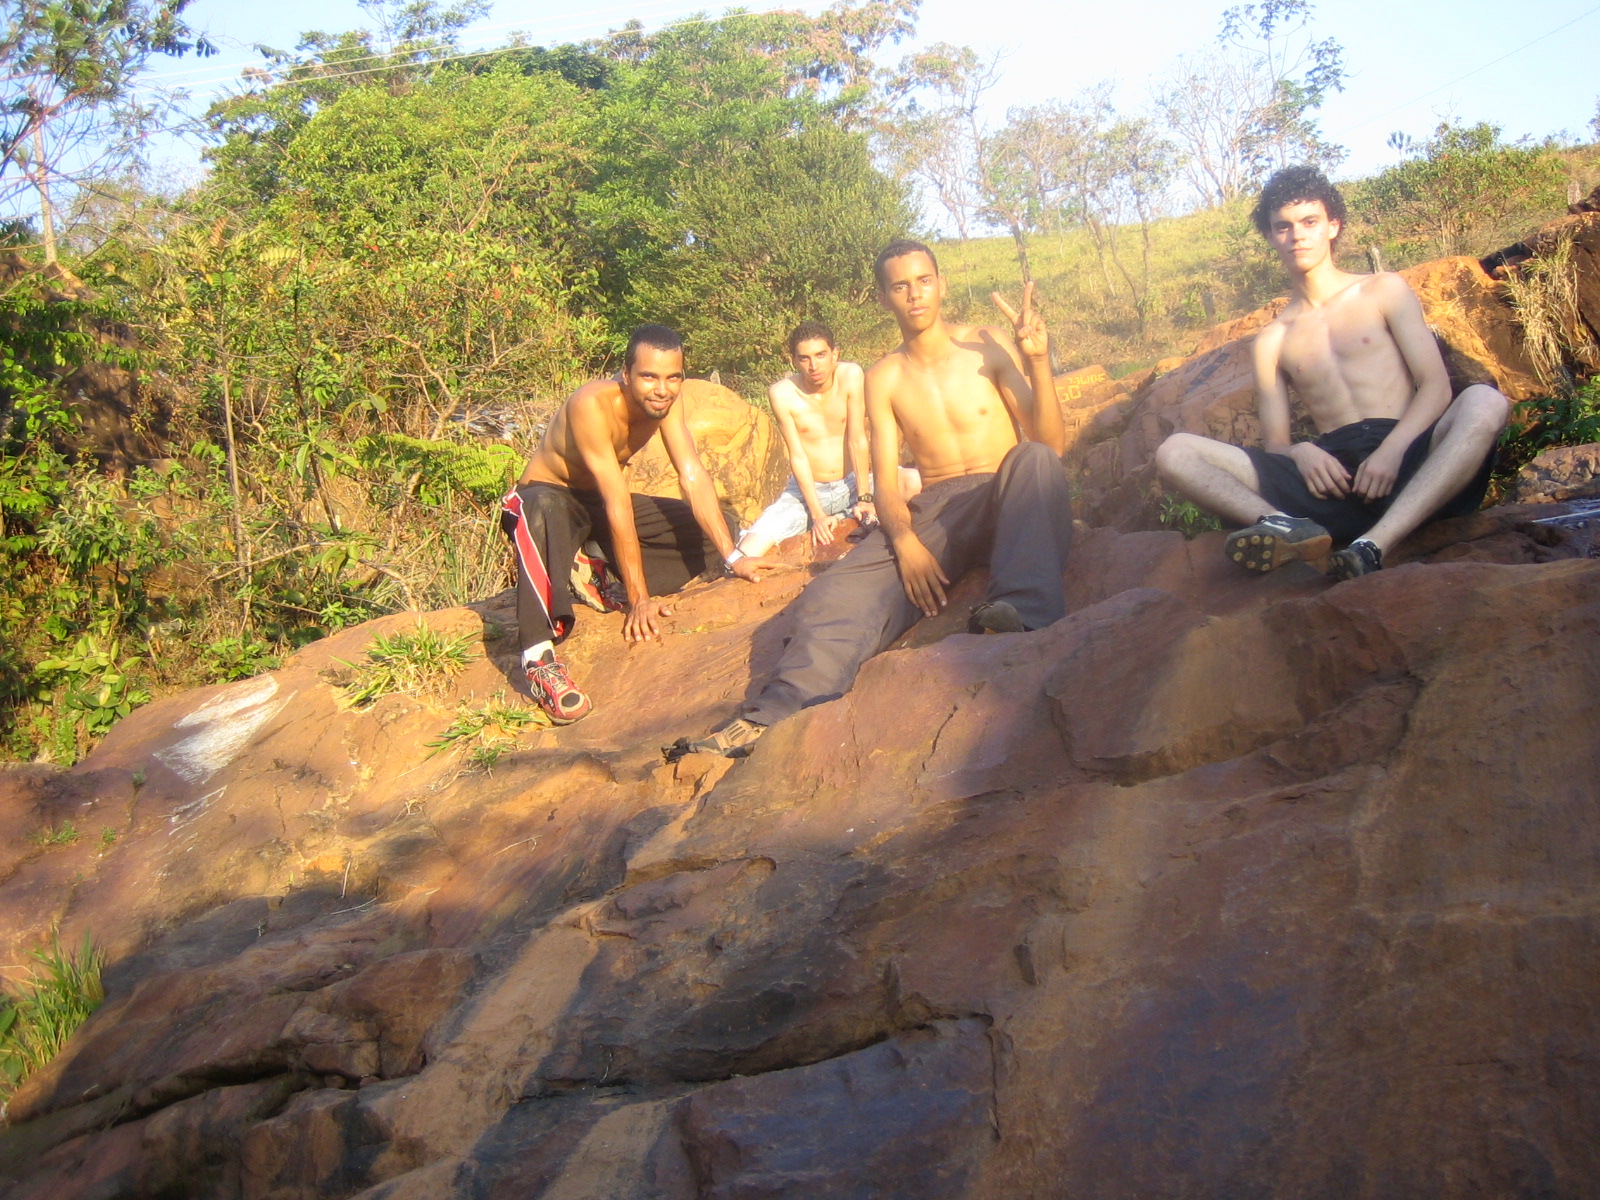 five shirtless young men sit on large rocks as they watch someone climb a hill